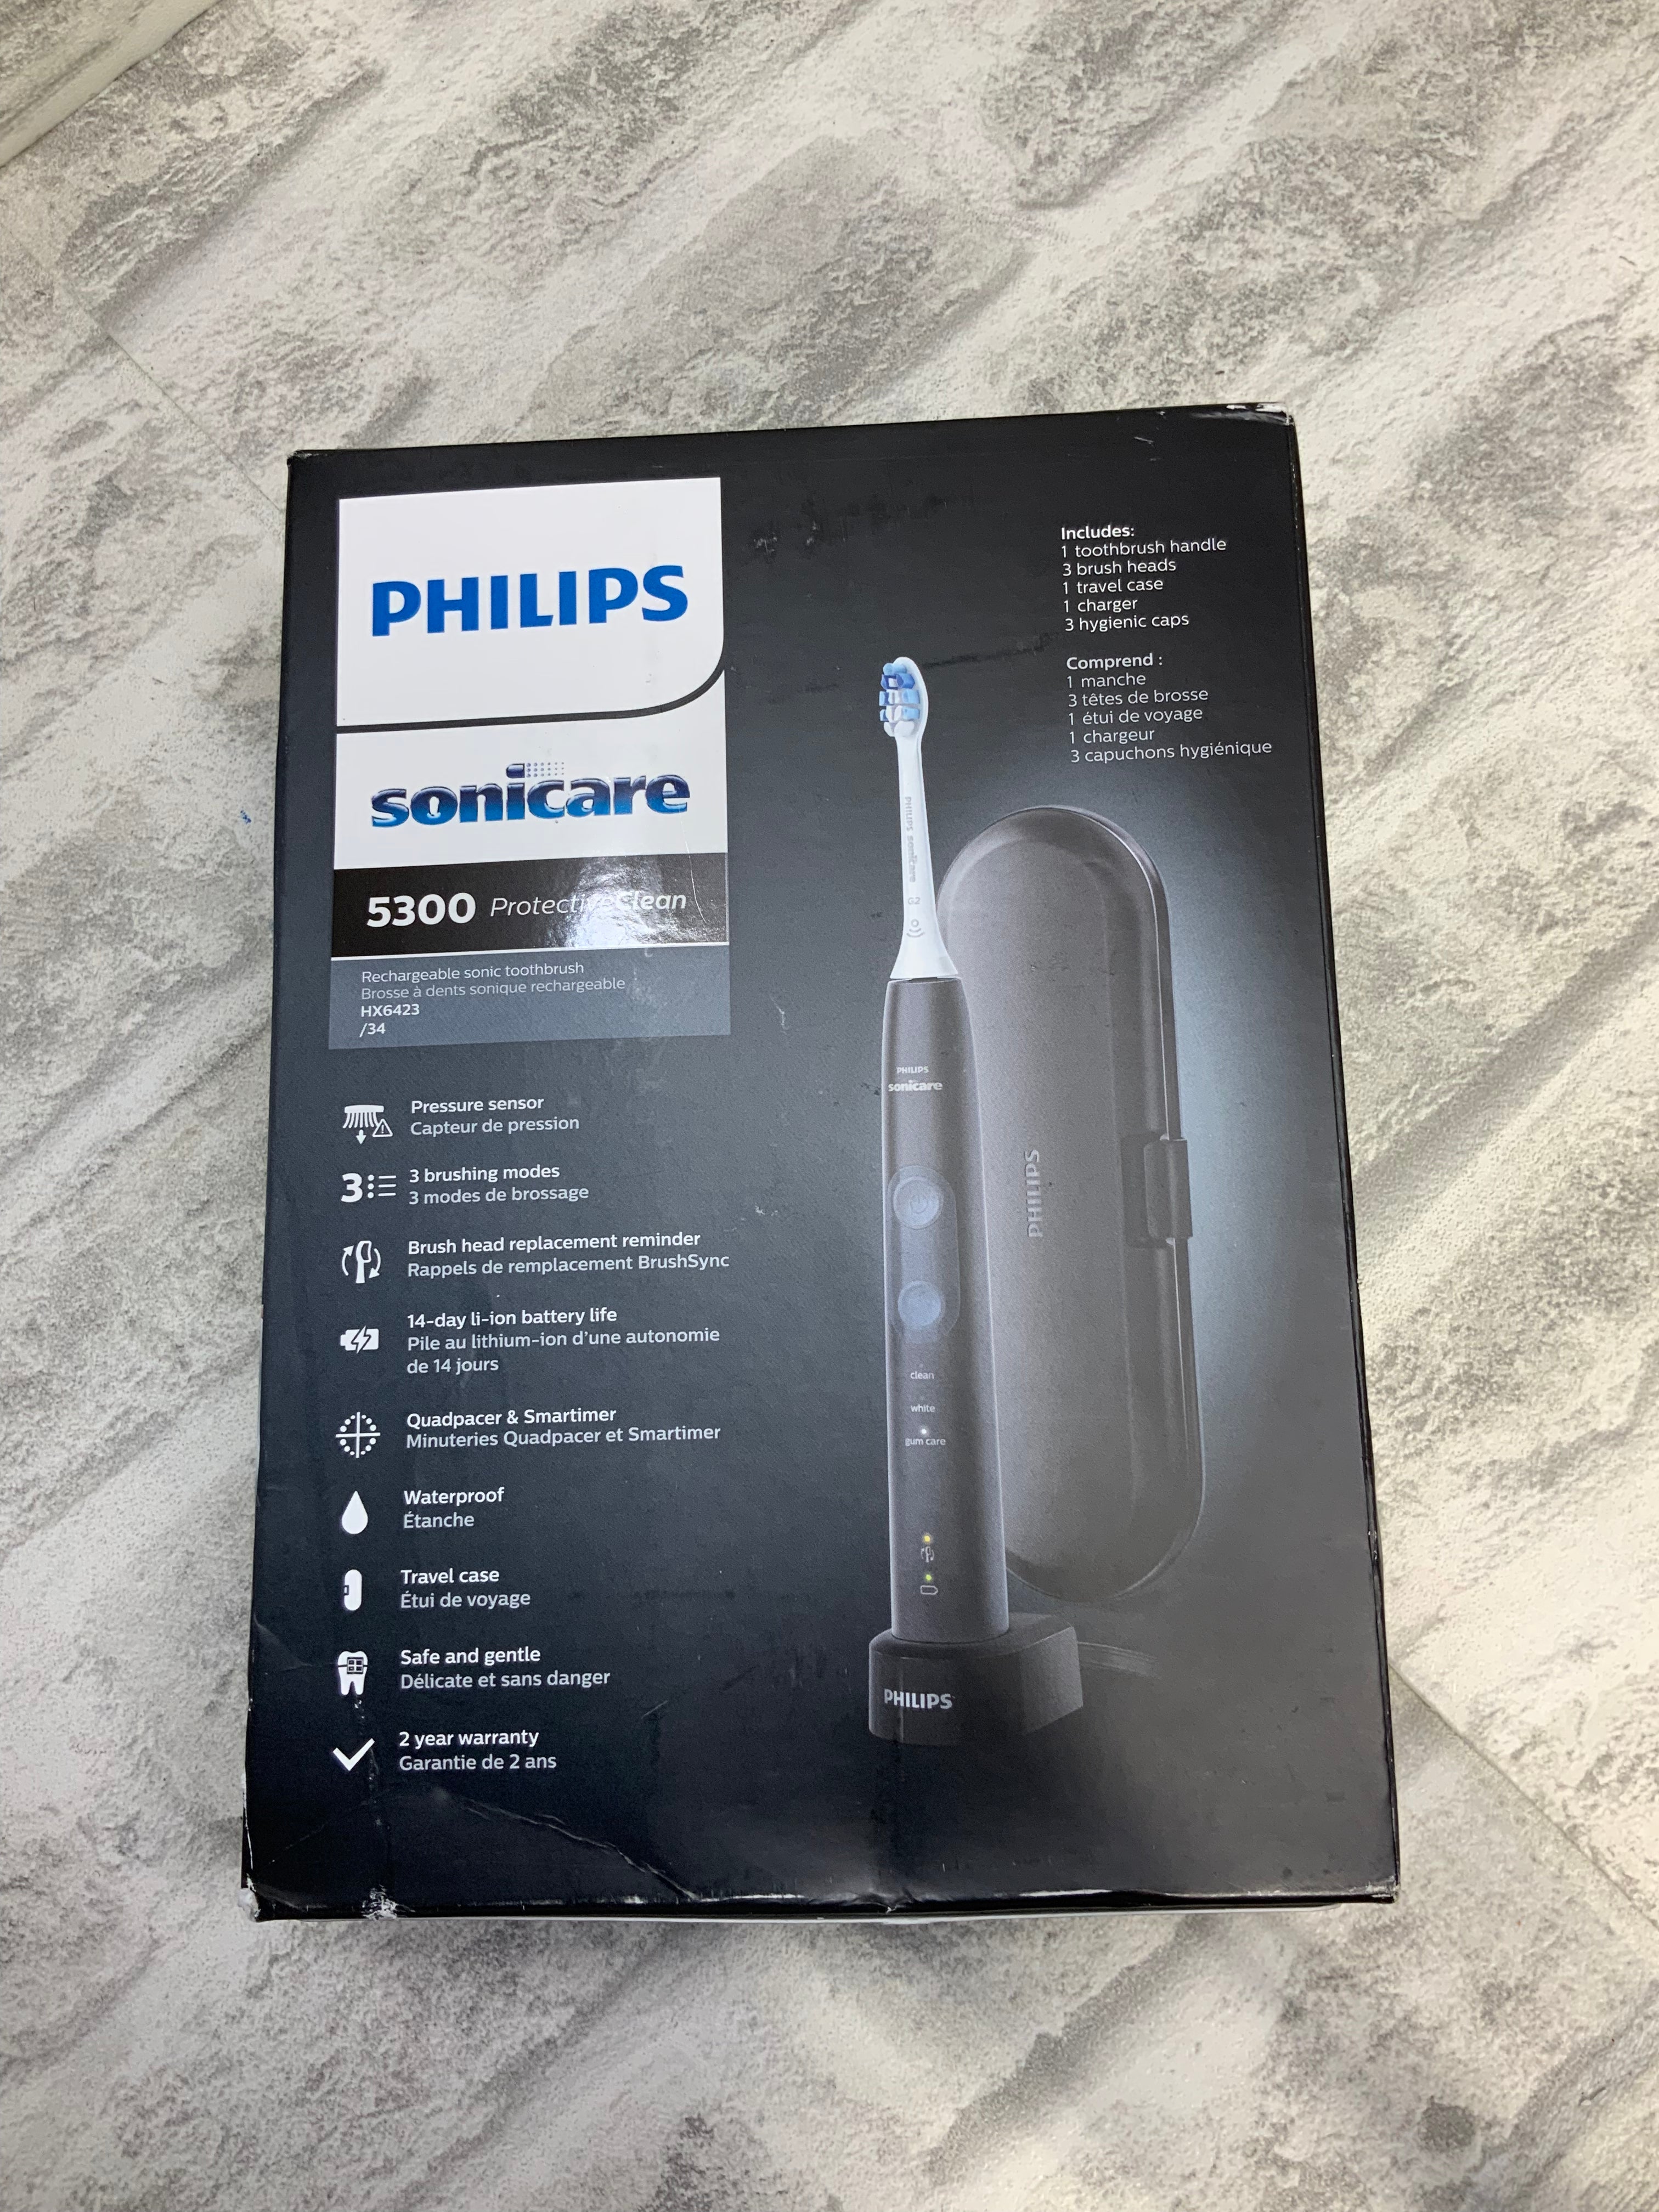 Philips Sonicare ProtectiveClean 5300 Rechargeable Electric Toothbrush, Black (7610736509166)